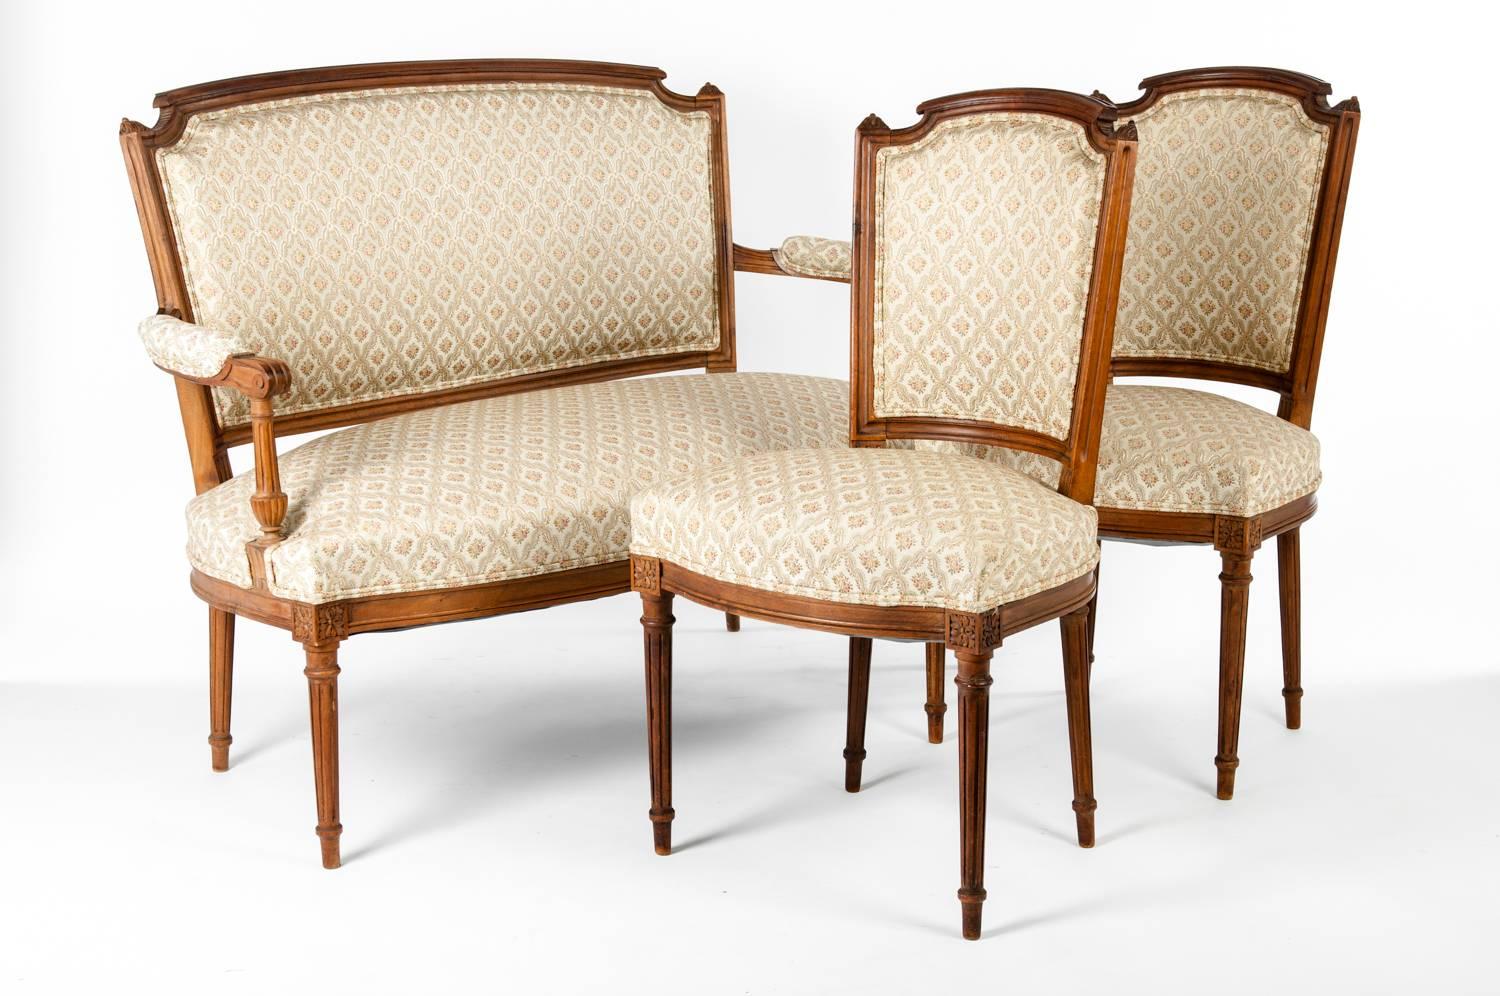 Vintage French settee with two side chairs. Excellent condition. The settee measures 49 inches depth x 35.5 inches high x 22 inches width x 18 inches seat high. Each chair measures 36 inches high x 20 inches depth x 18 inches seat high.